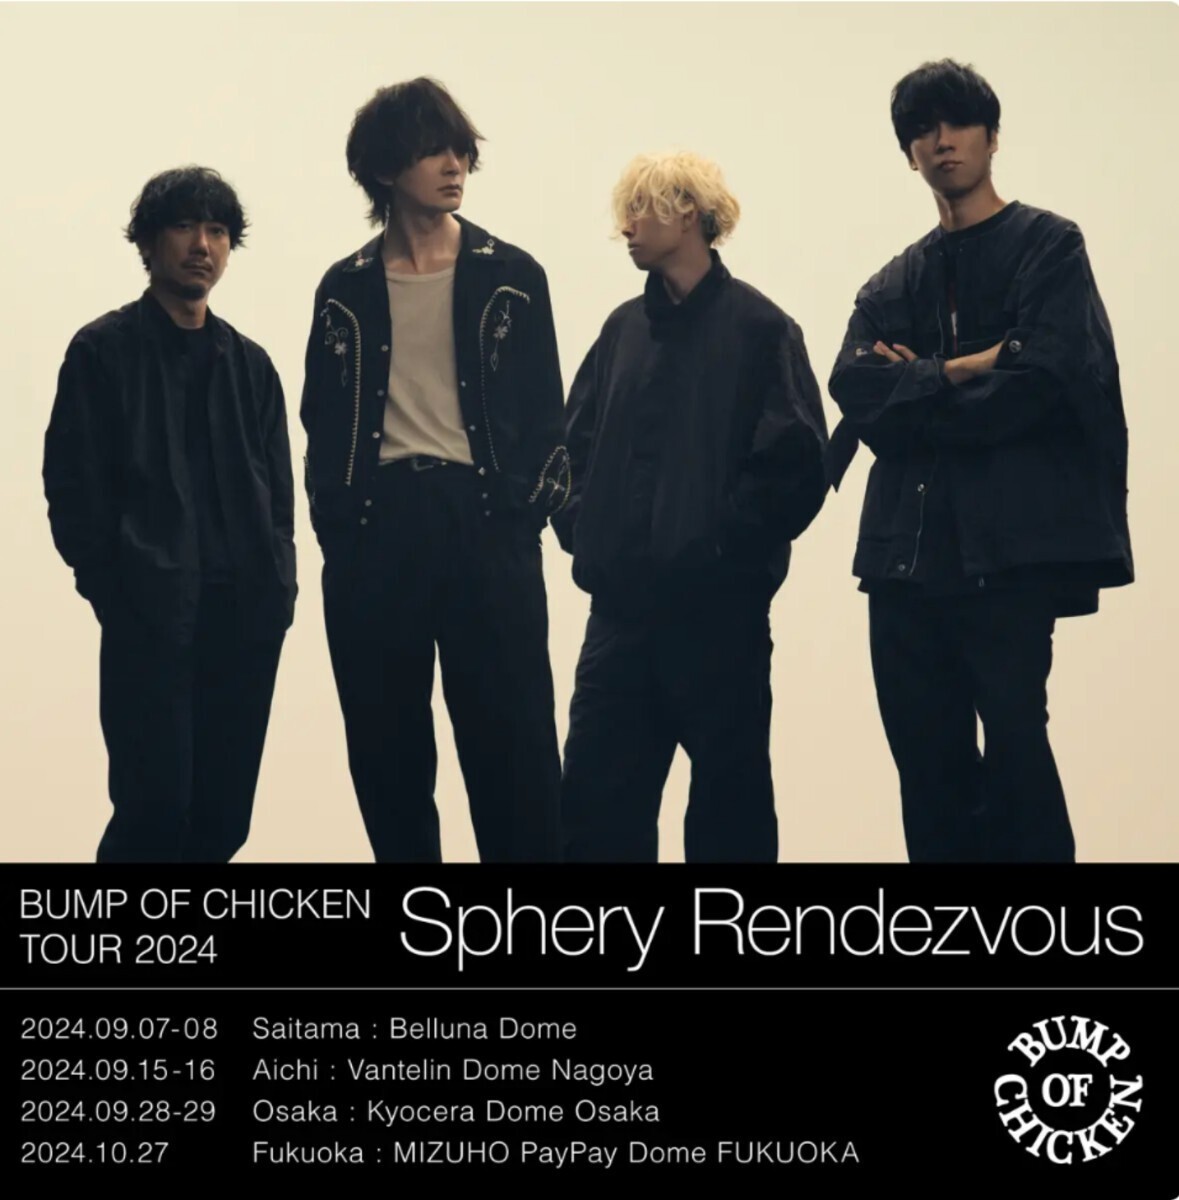 BUMP OF CHICKEN TOUR 2024 Sphery Rendezvous　最速先行抽選　申し込み　シリアルコード_画像1